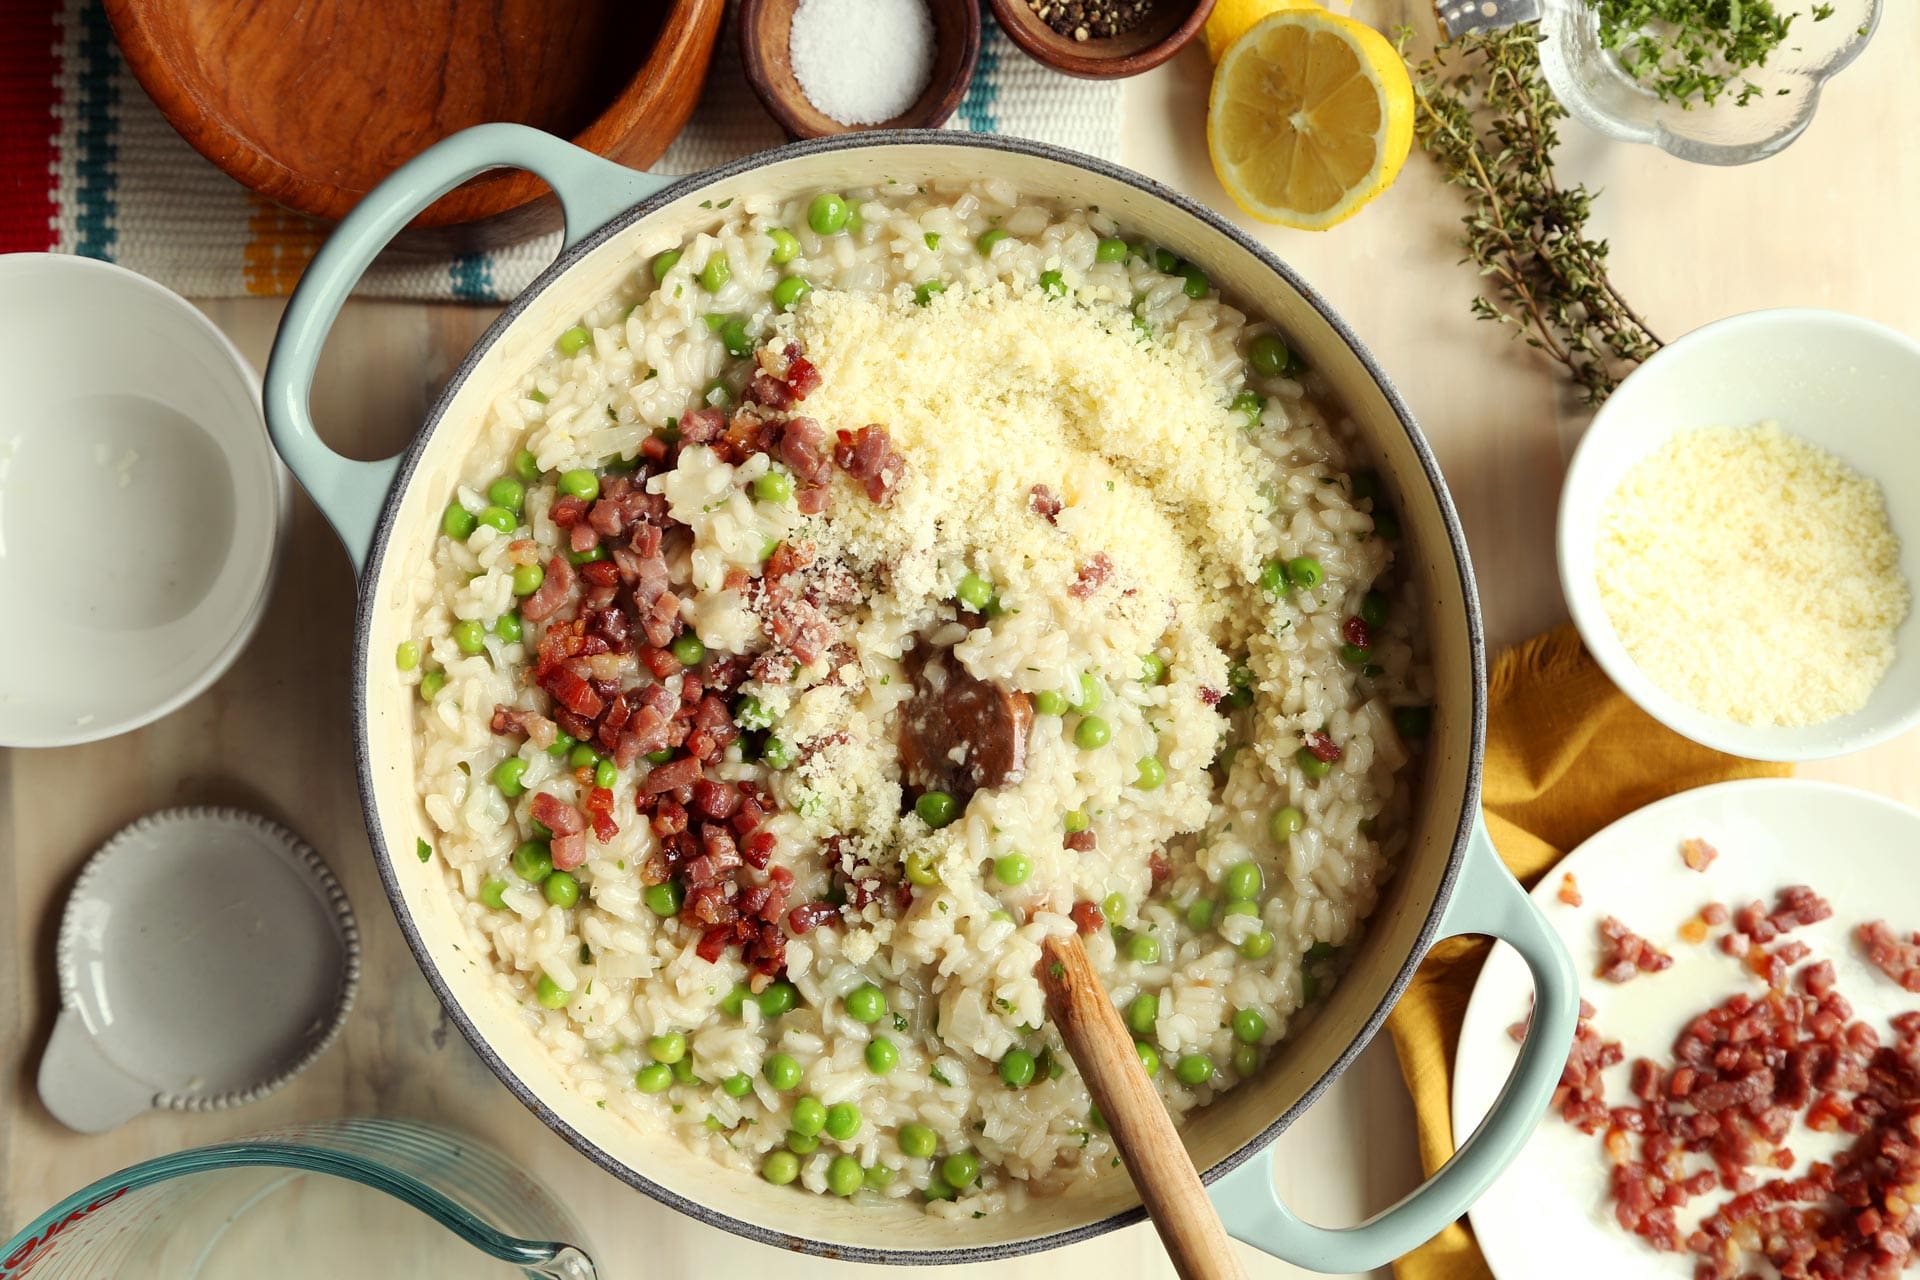 Oven-Baked Pea, Pancetta and Lemon Risotto